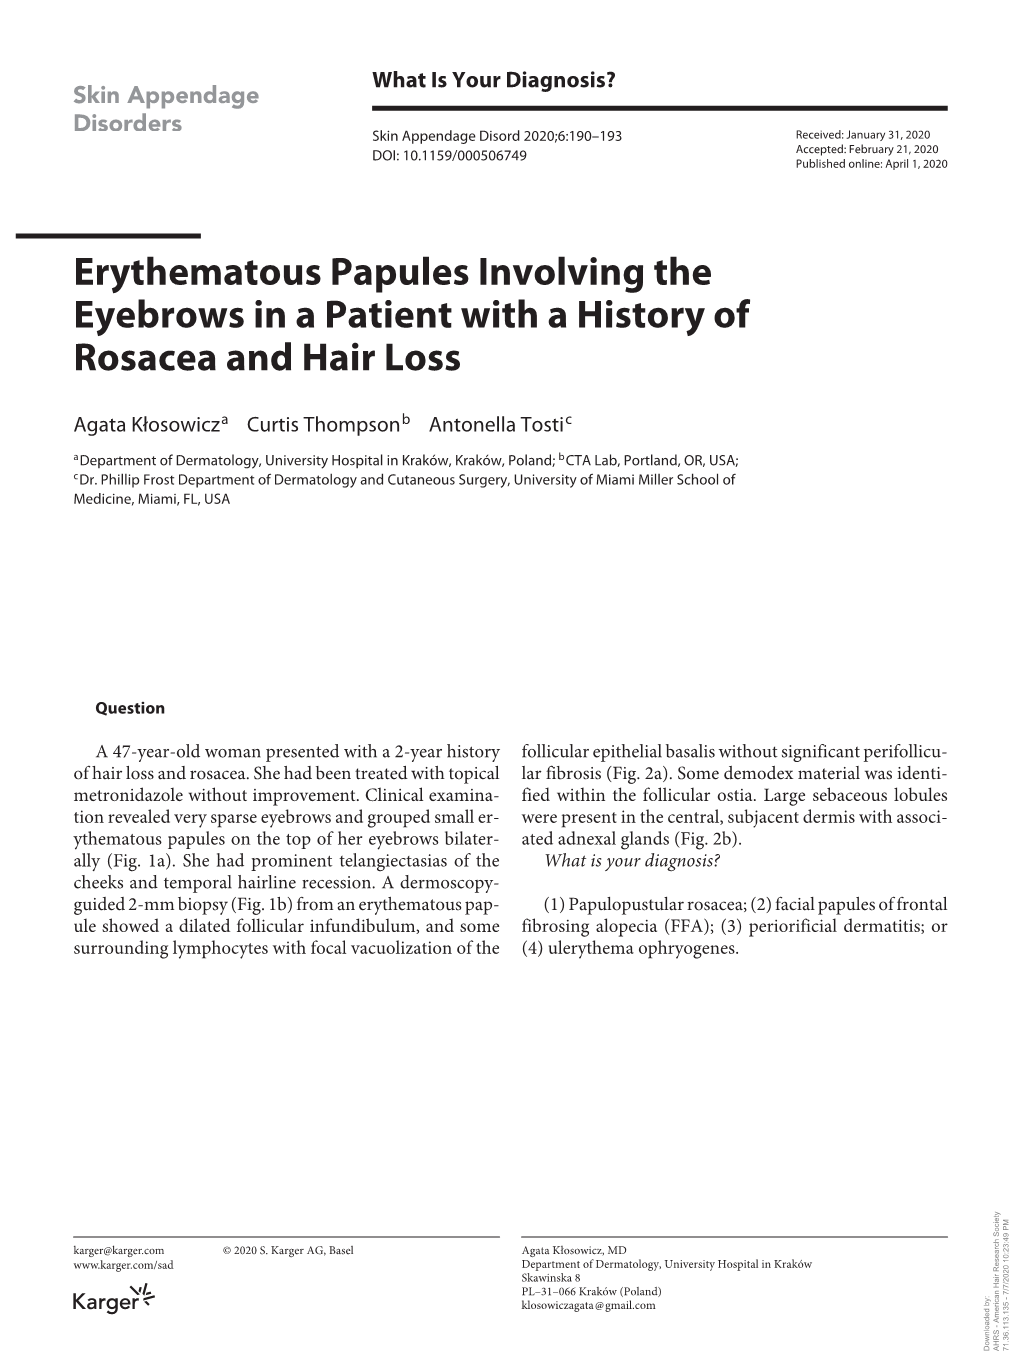 2020 Erythematous Papules Involving the Eyebrows in a Patient with A